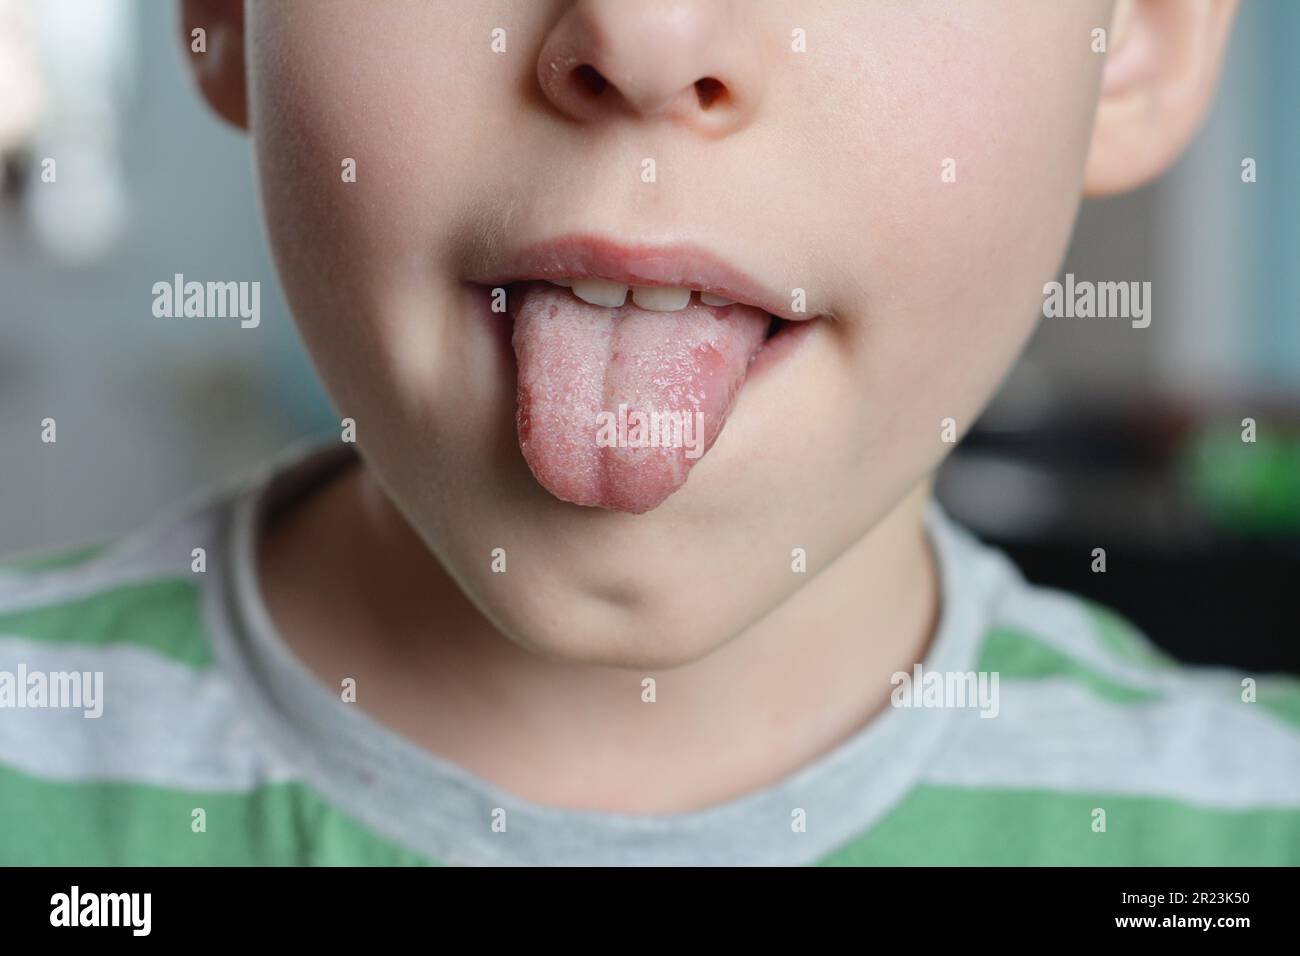 White spots on the kid tongue. Oral thrush is a fungal infection that affects the soft tissue inside the mouth. It is quite common in young children. Stock Photo